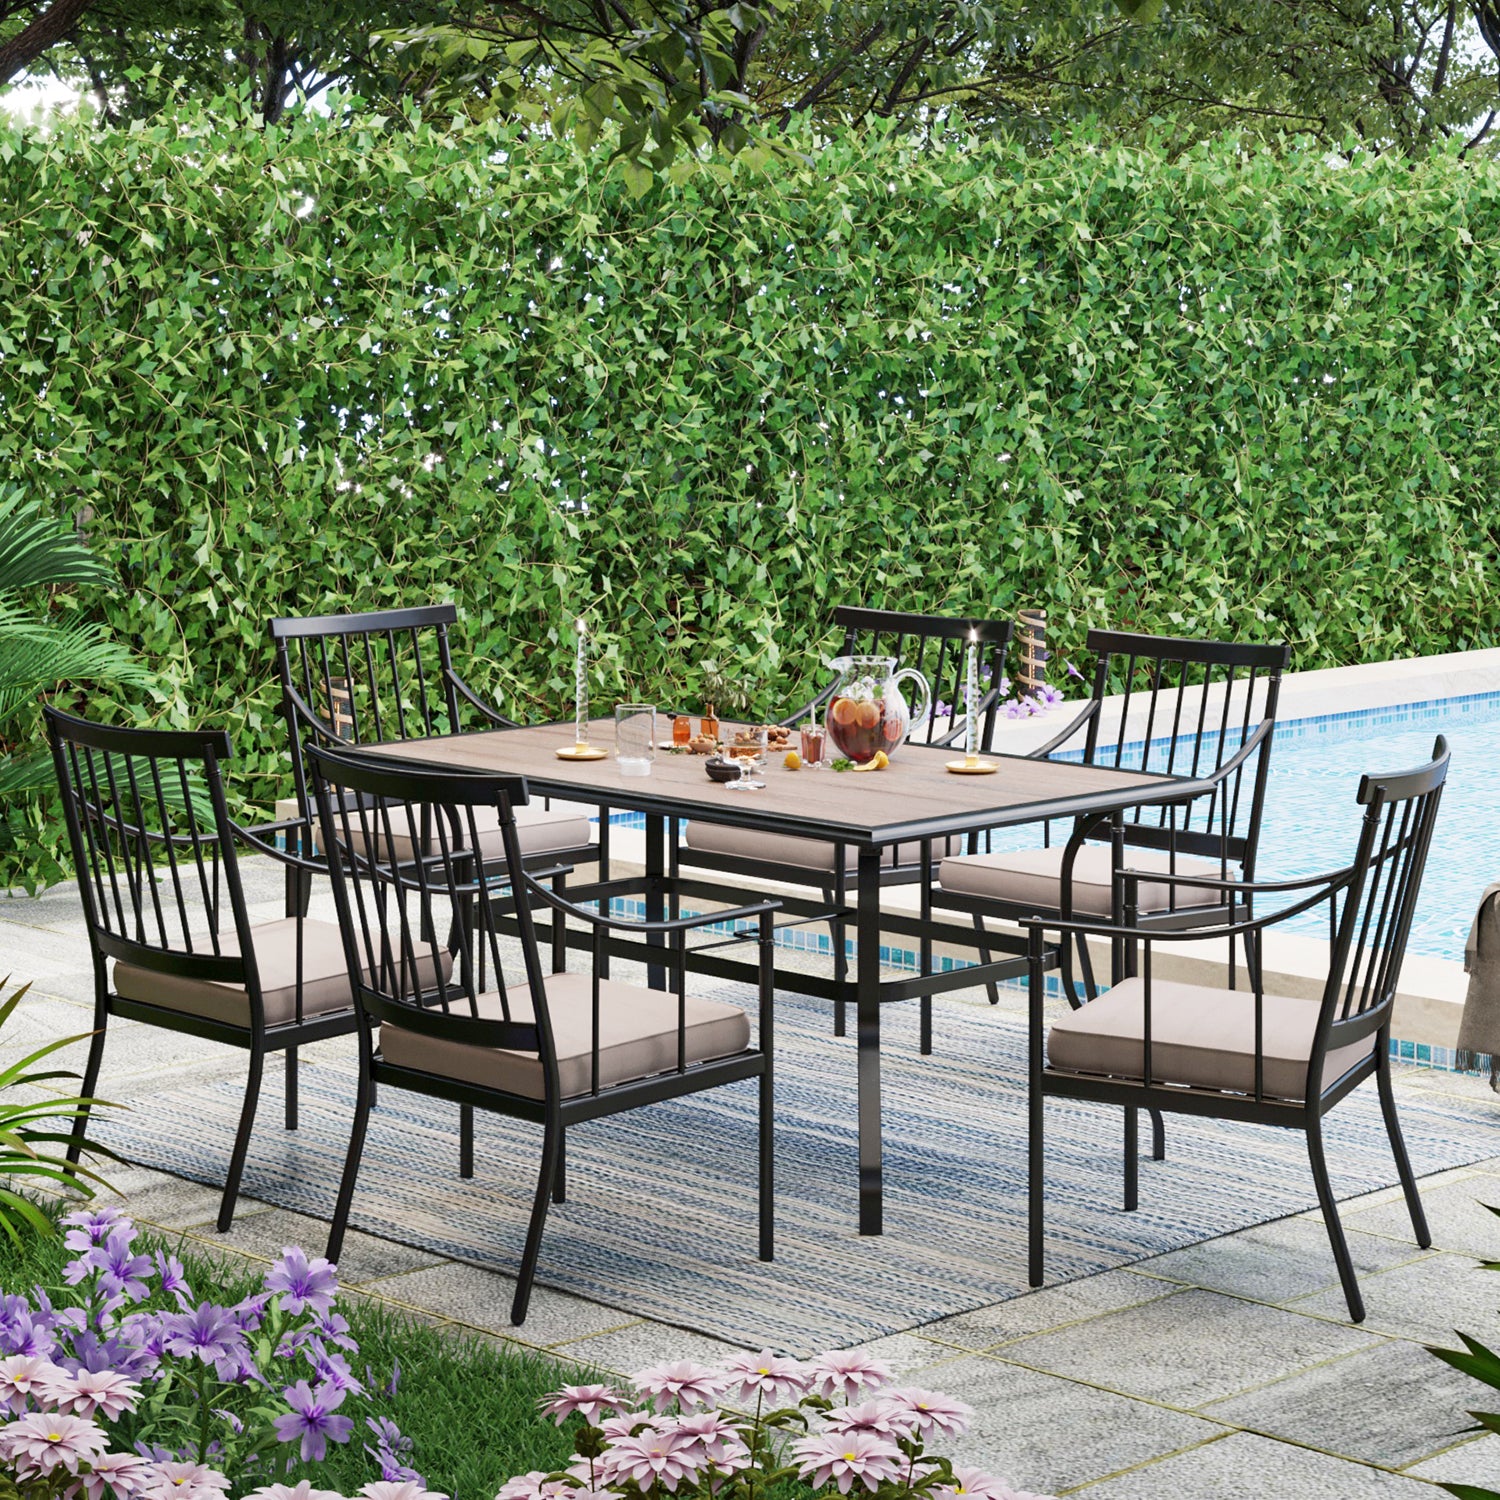 Sophia & William Wood-look Table & 6 Stylish Dining Arm Chairs 7-Piece Patio Outdoor Dining set